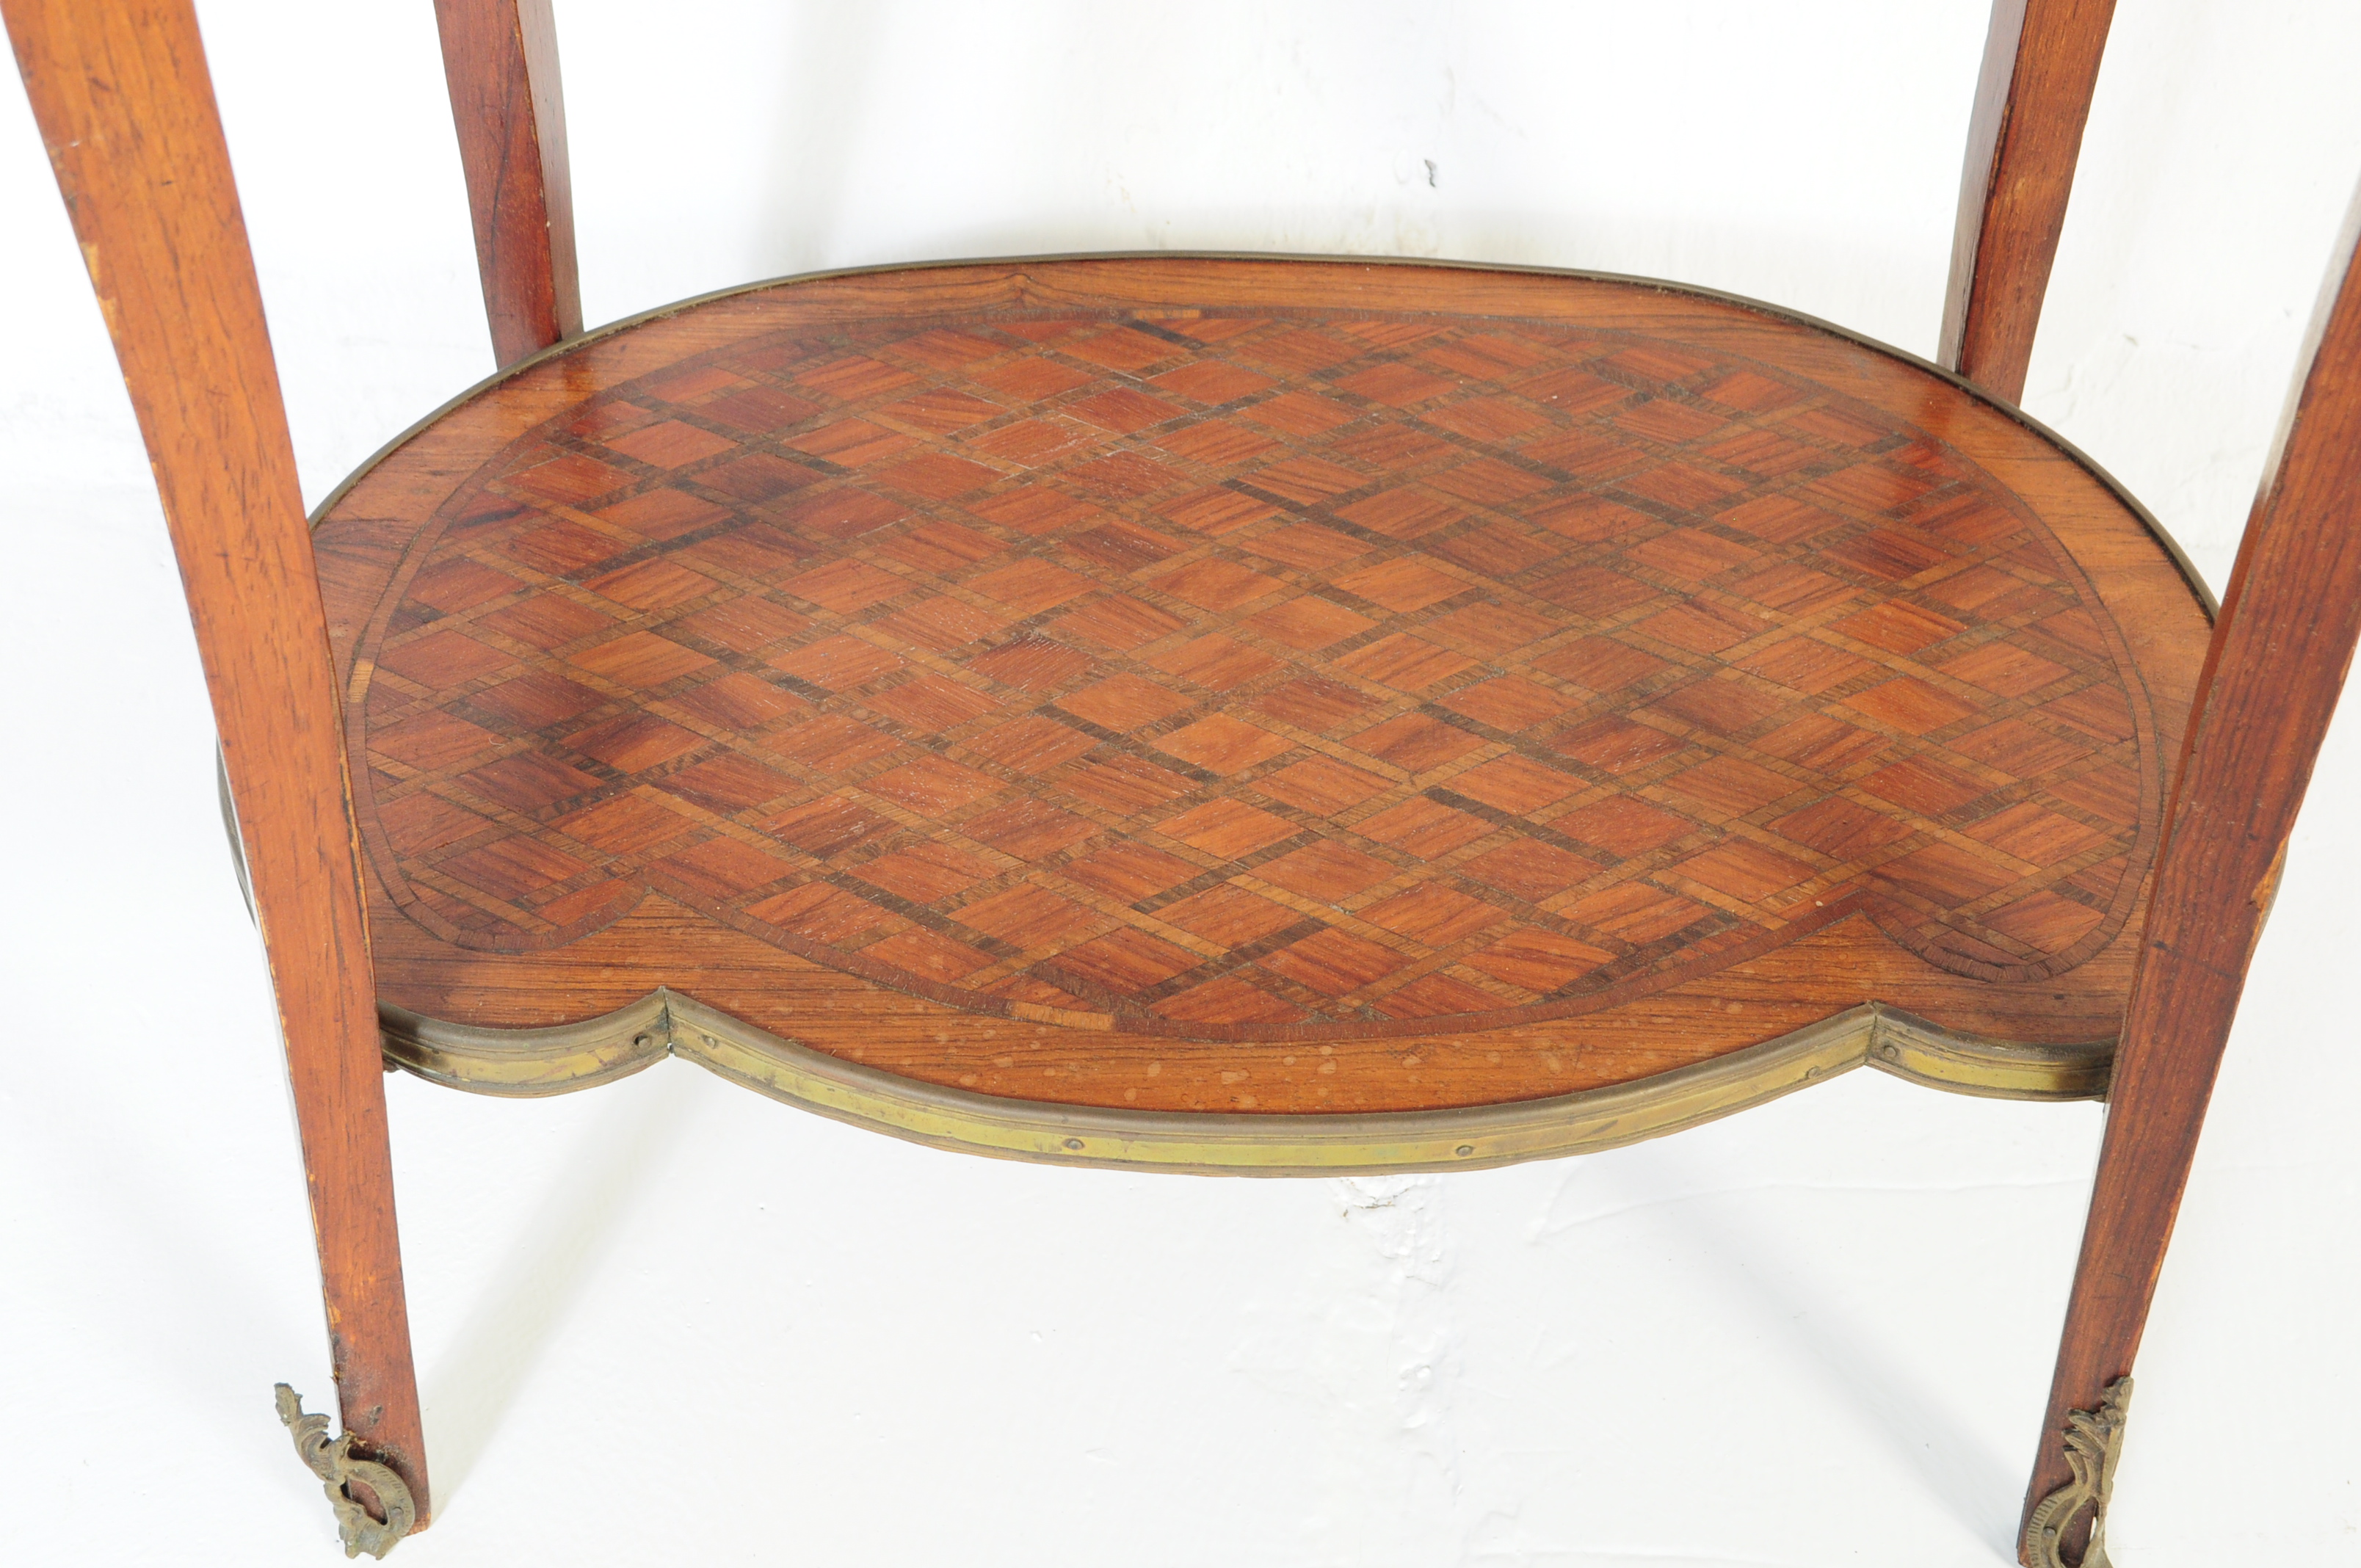 19TH CENTURY LOUIS XVI STYLE MARQUETRY LAMP TABLE - Image 5 of 7